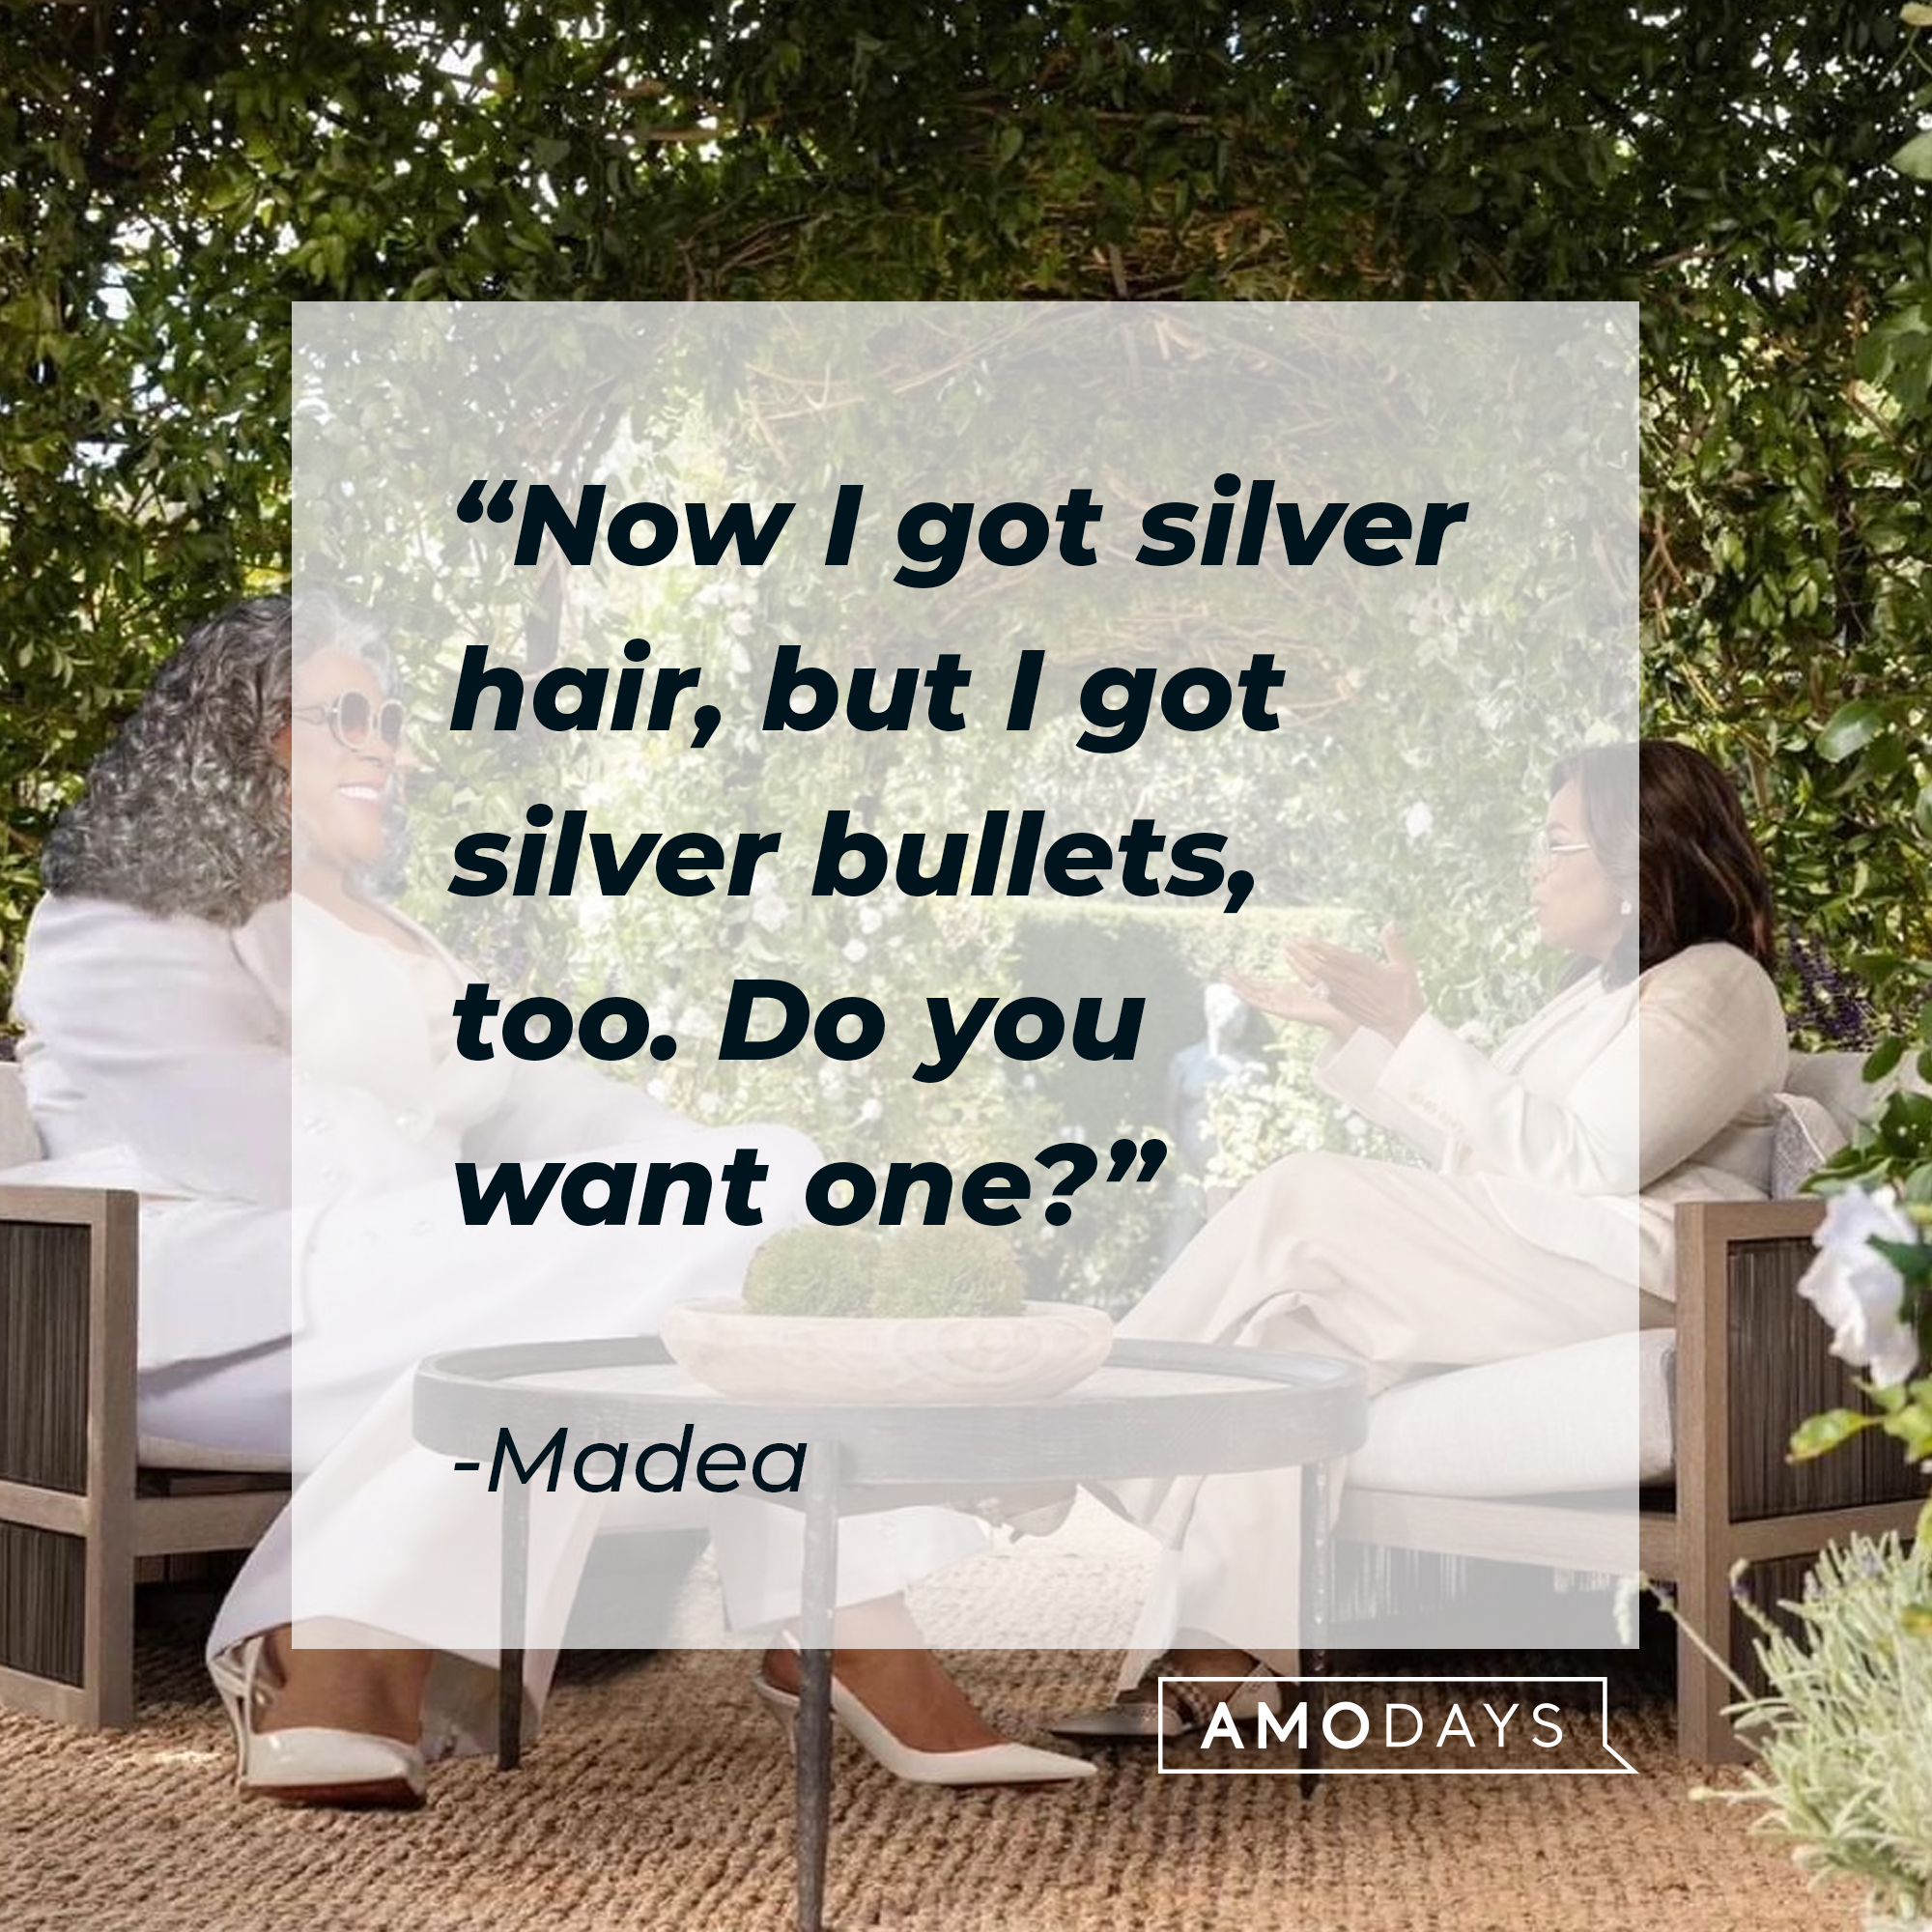 Madea's quote: "Now I got silver hair, but I got silver bullets, too. Do you want one?" | Source: Facebook.com/madea